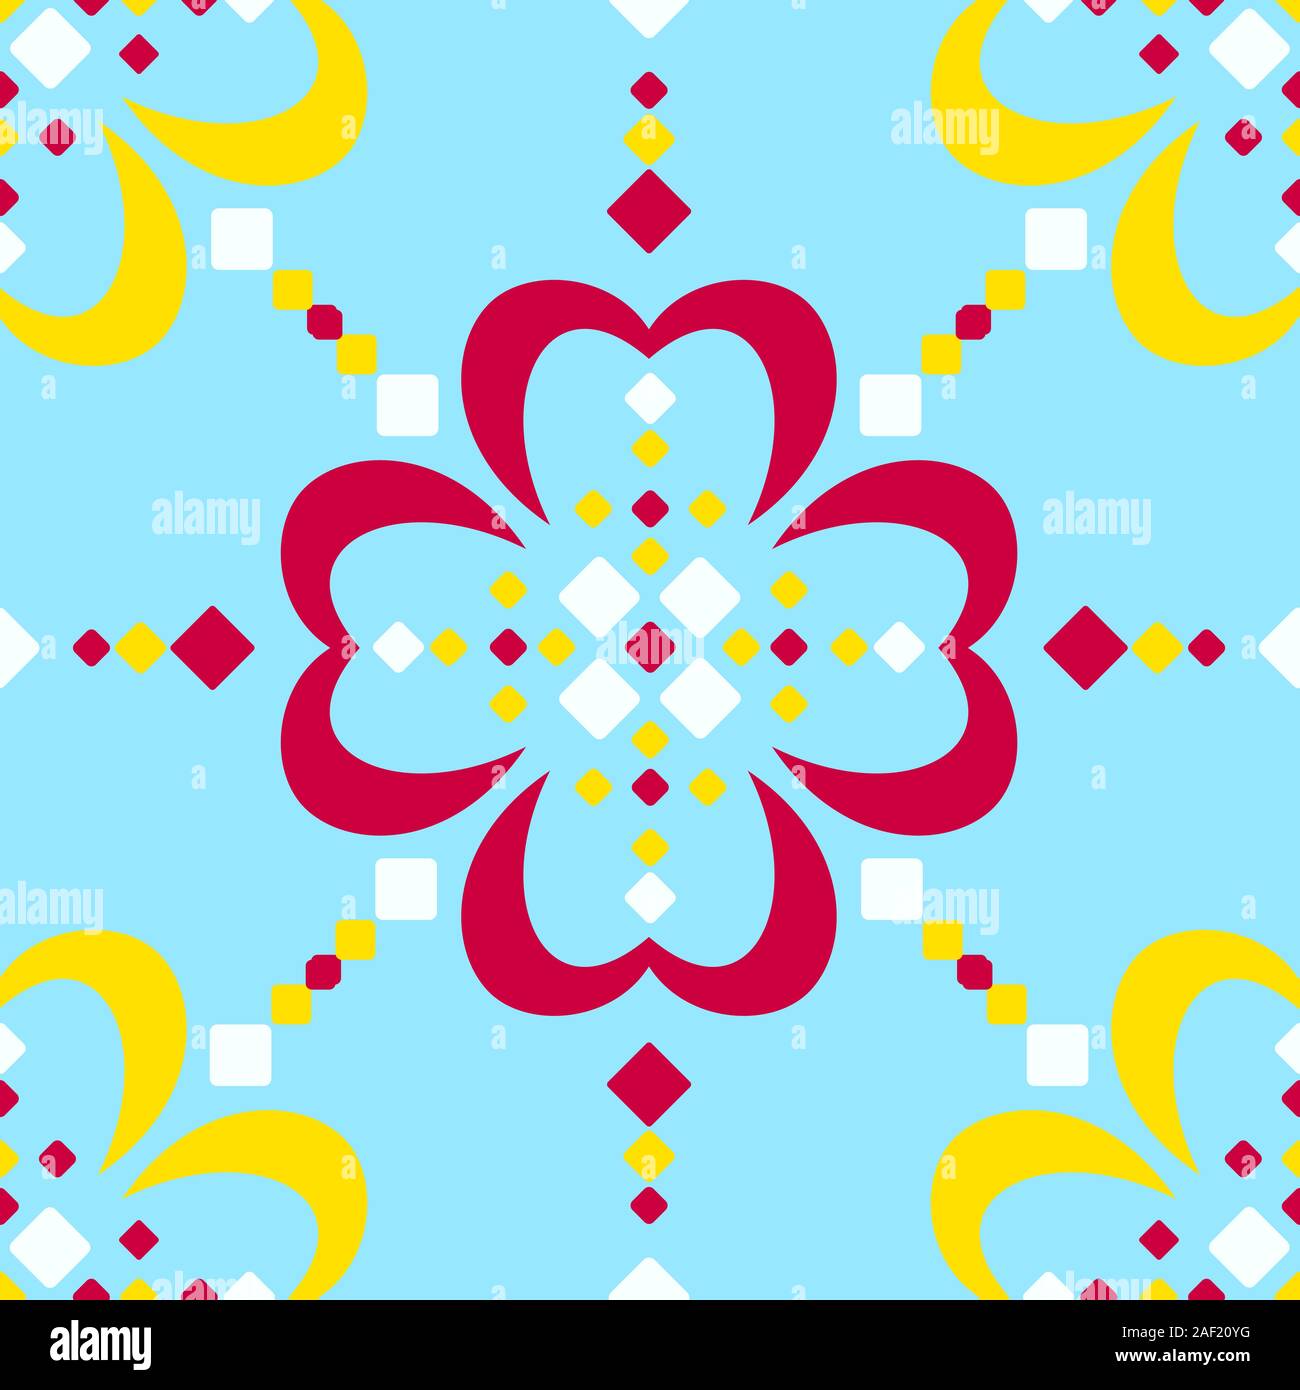 Jumbo large scale Fair Isle style blue red yellow white vector seamless abstract floral pattern Stock Vector